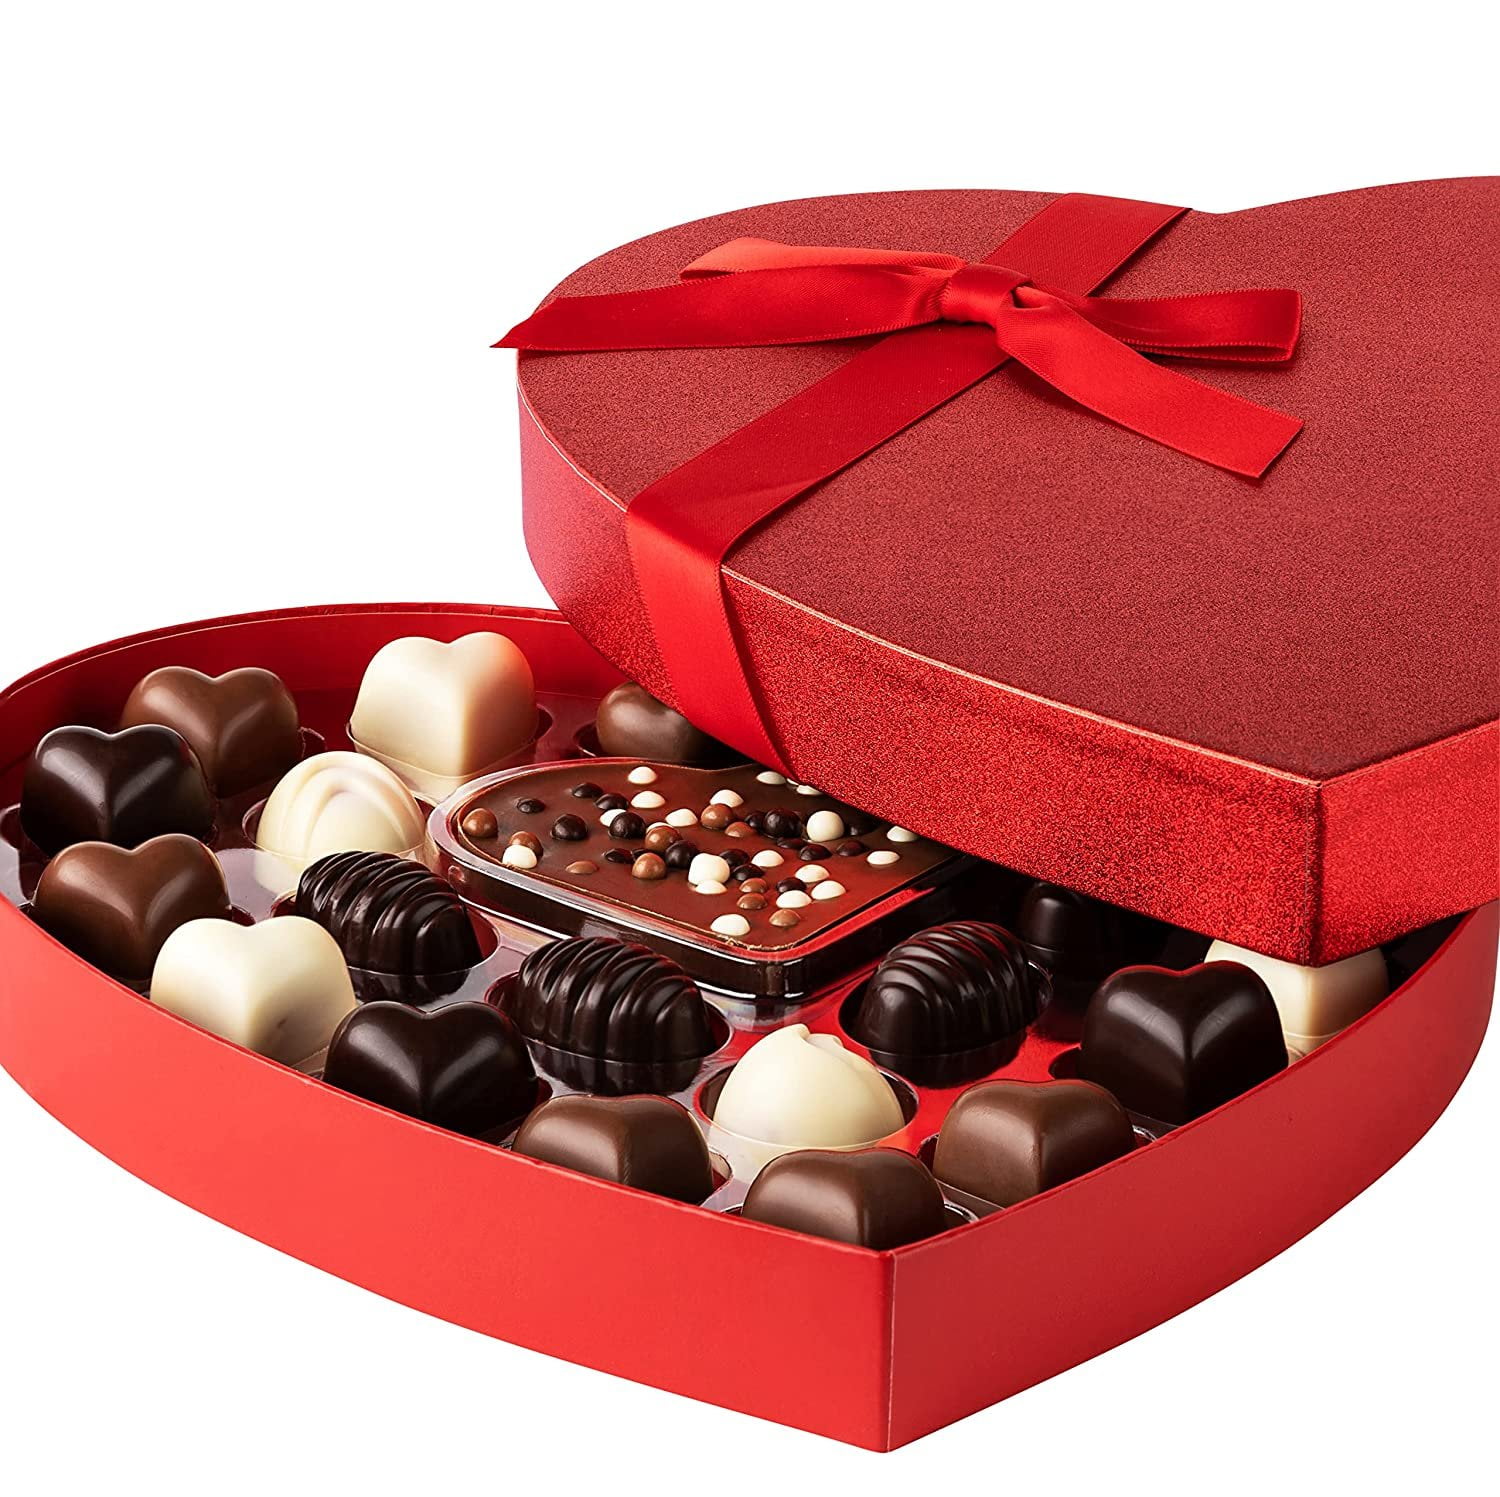 Chocolate Lover's Valentine Basket – The Chocolate Delicacy